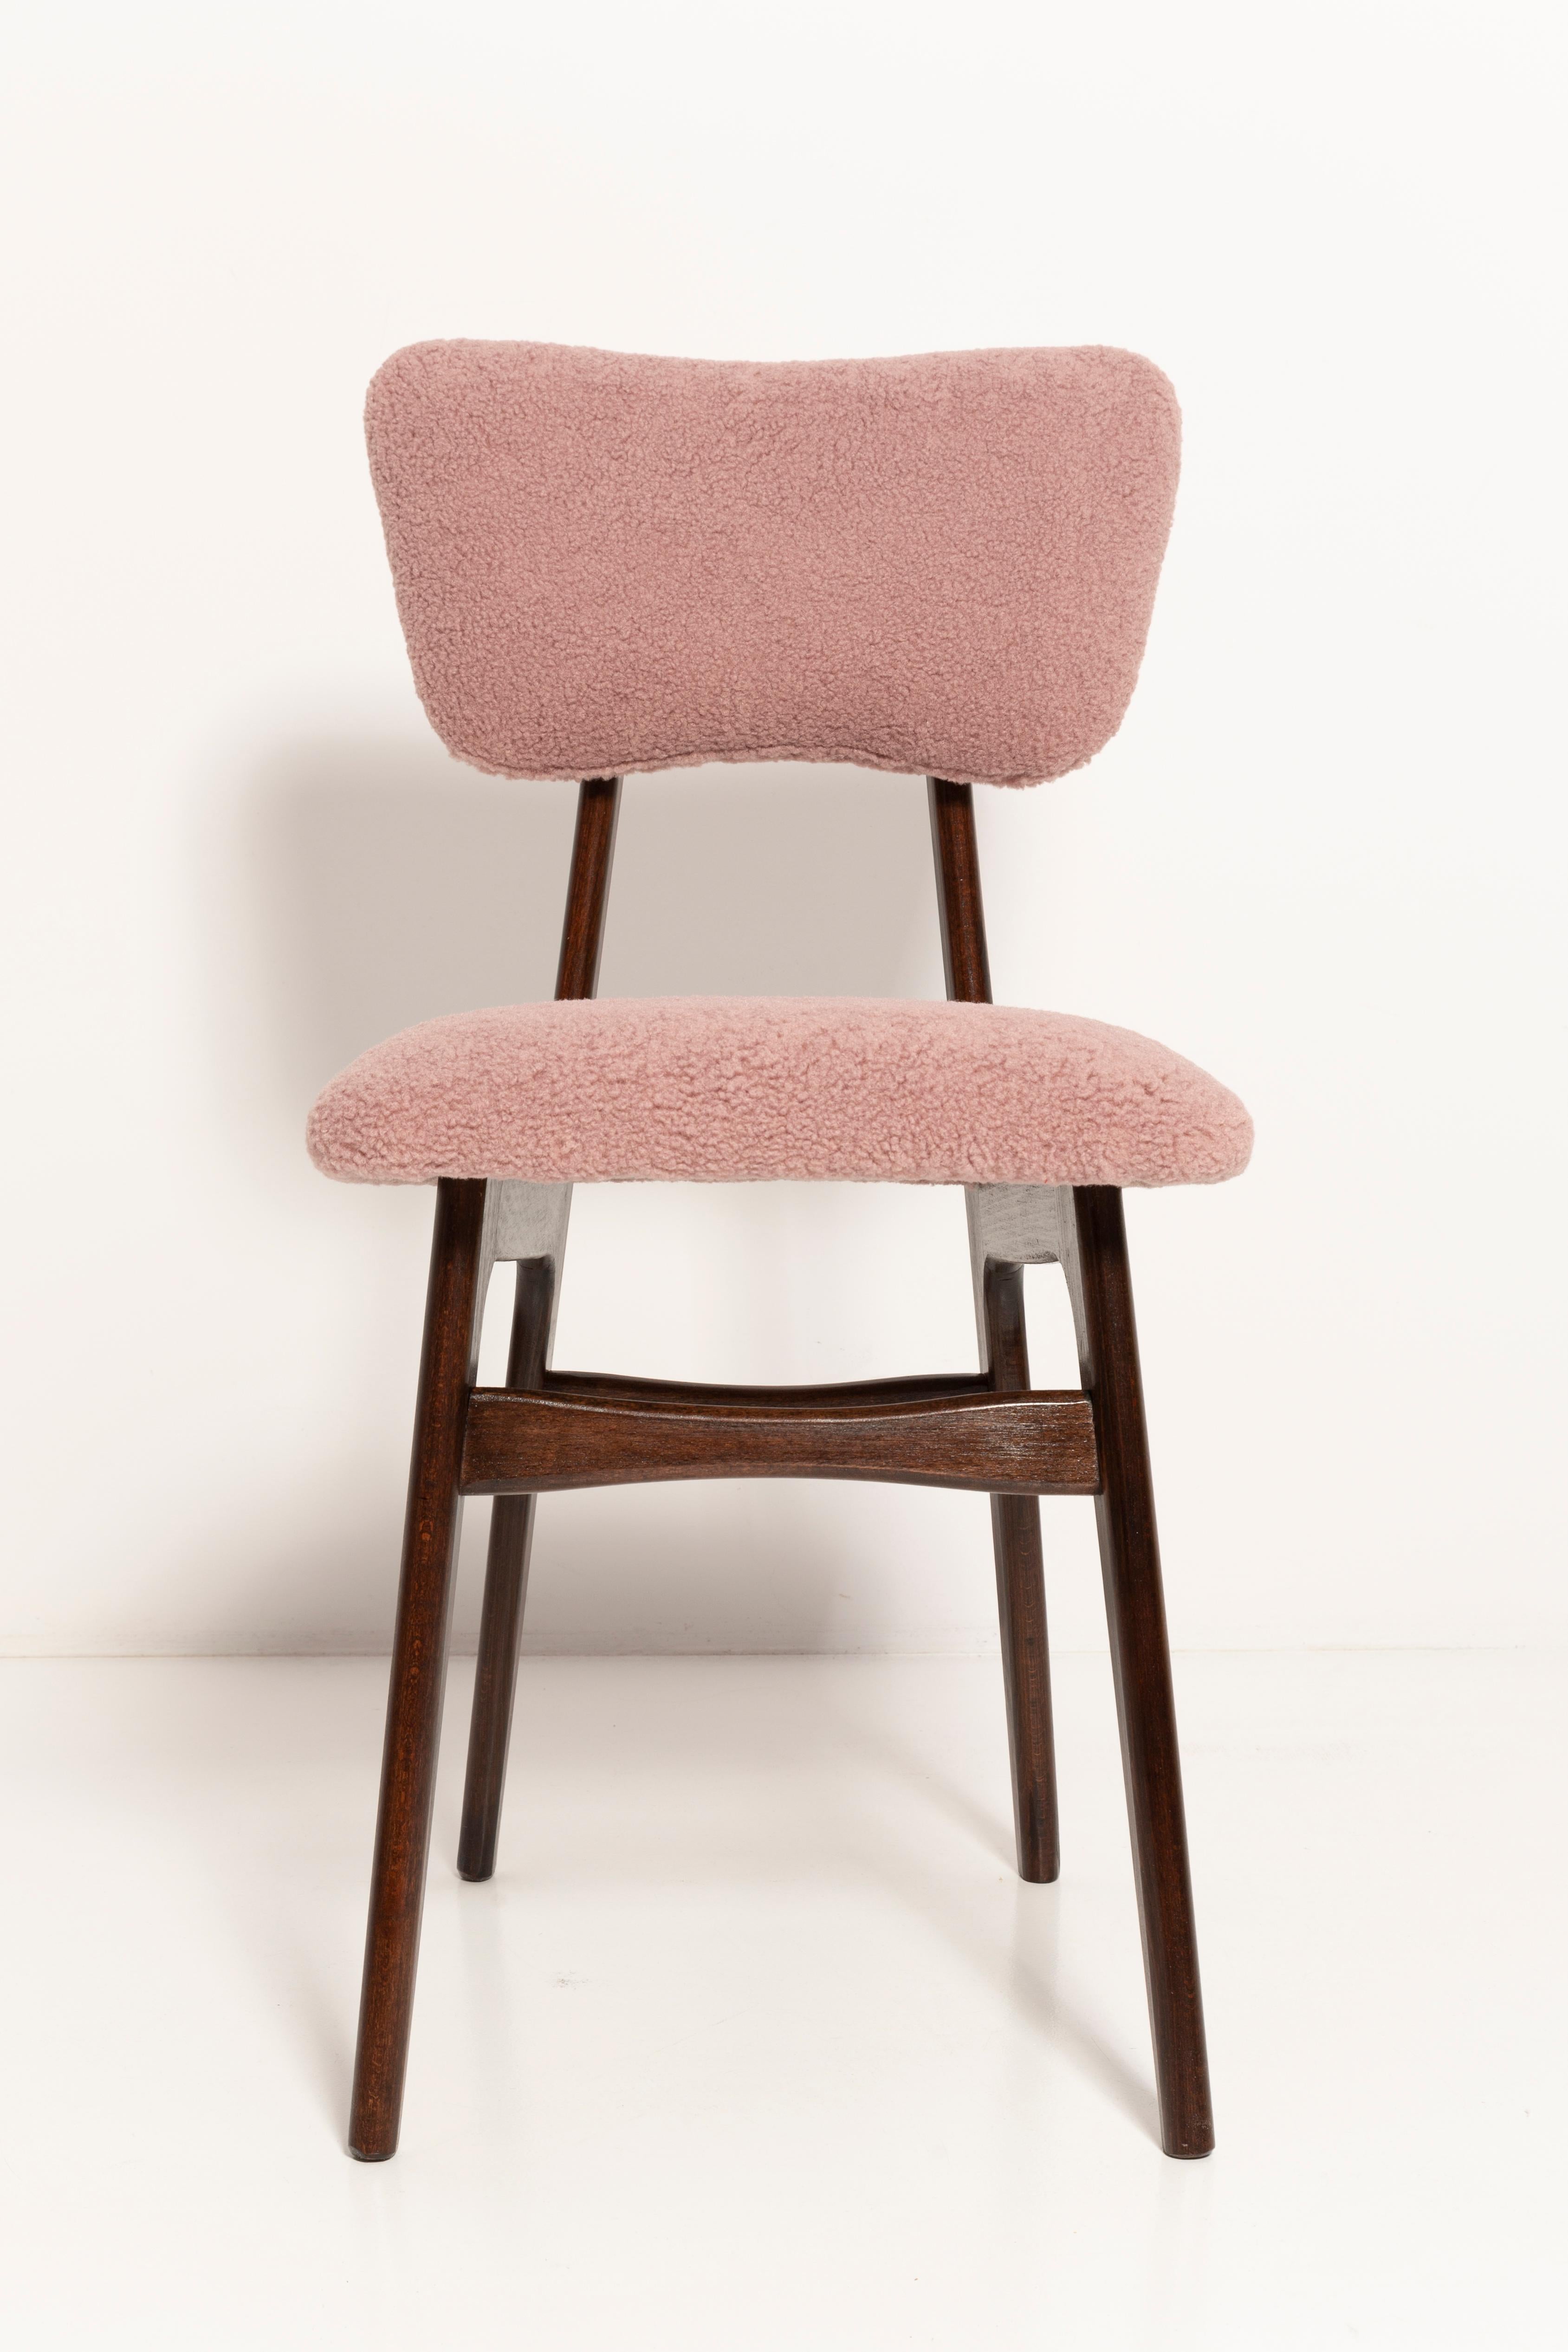 Set of Seven Mid Century Butterfly Dining Chairs, Pink Boucle, Europe, 1960s For Sale 4